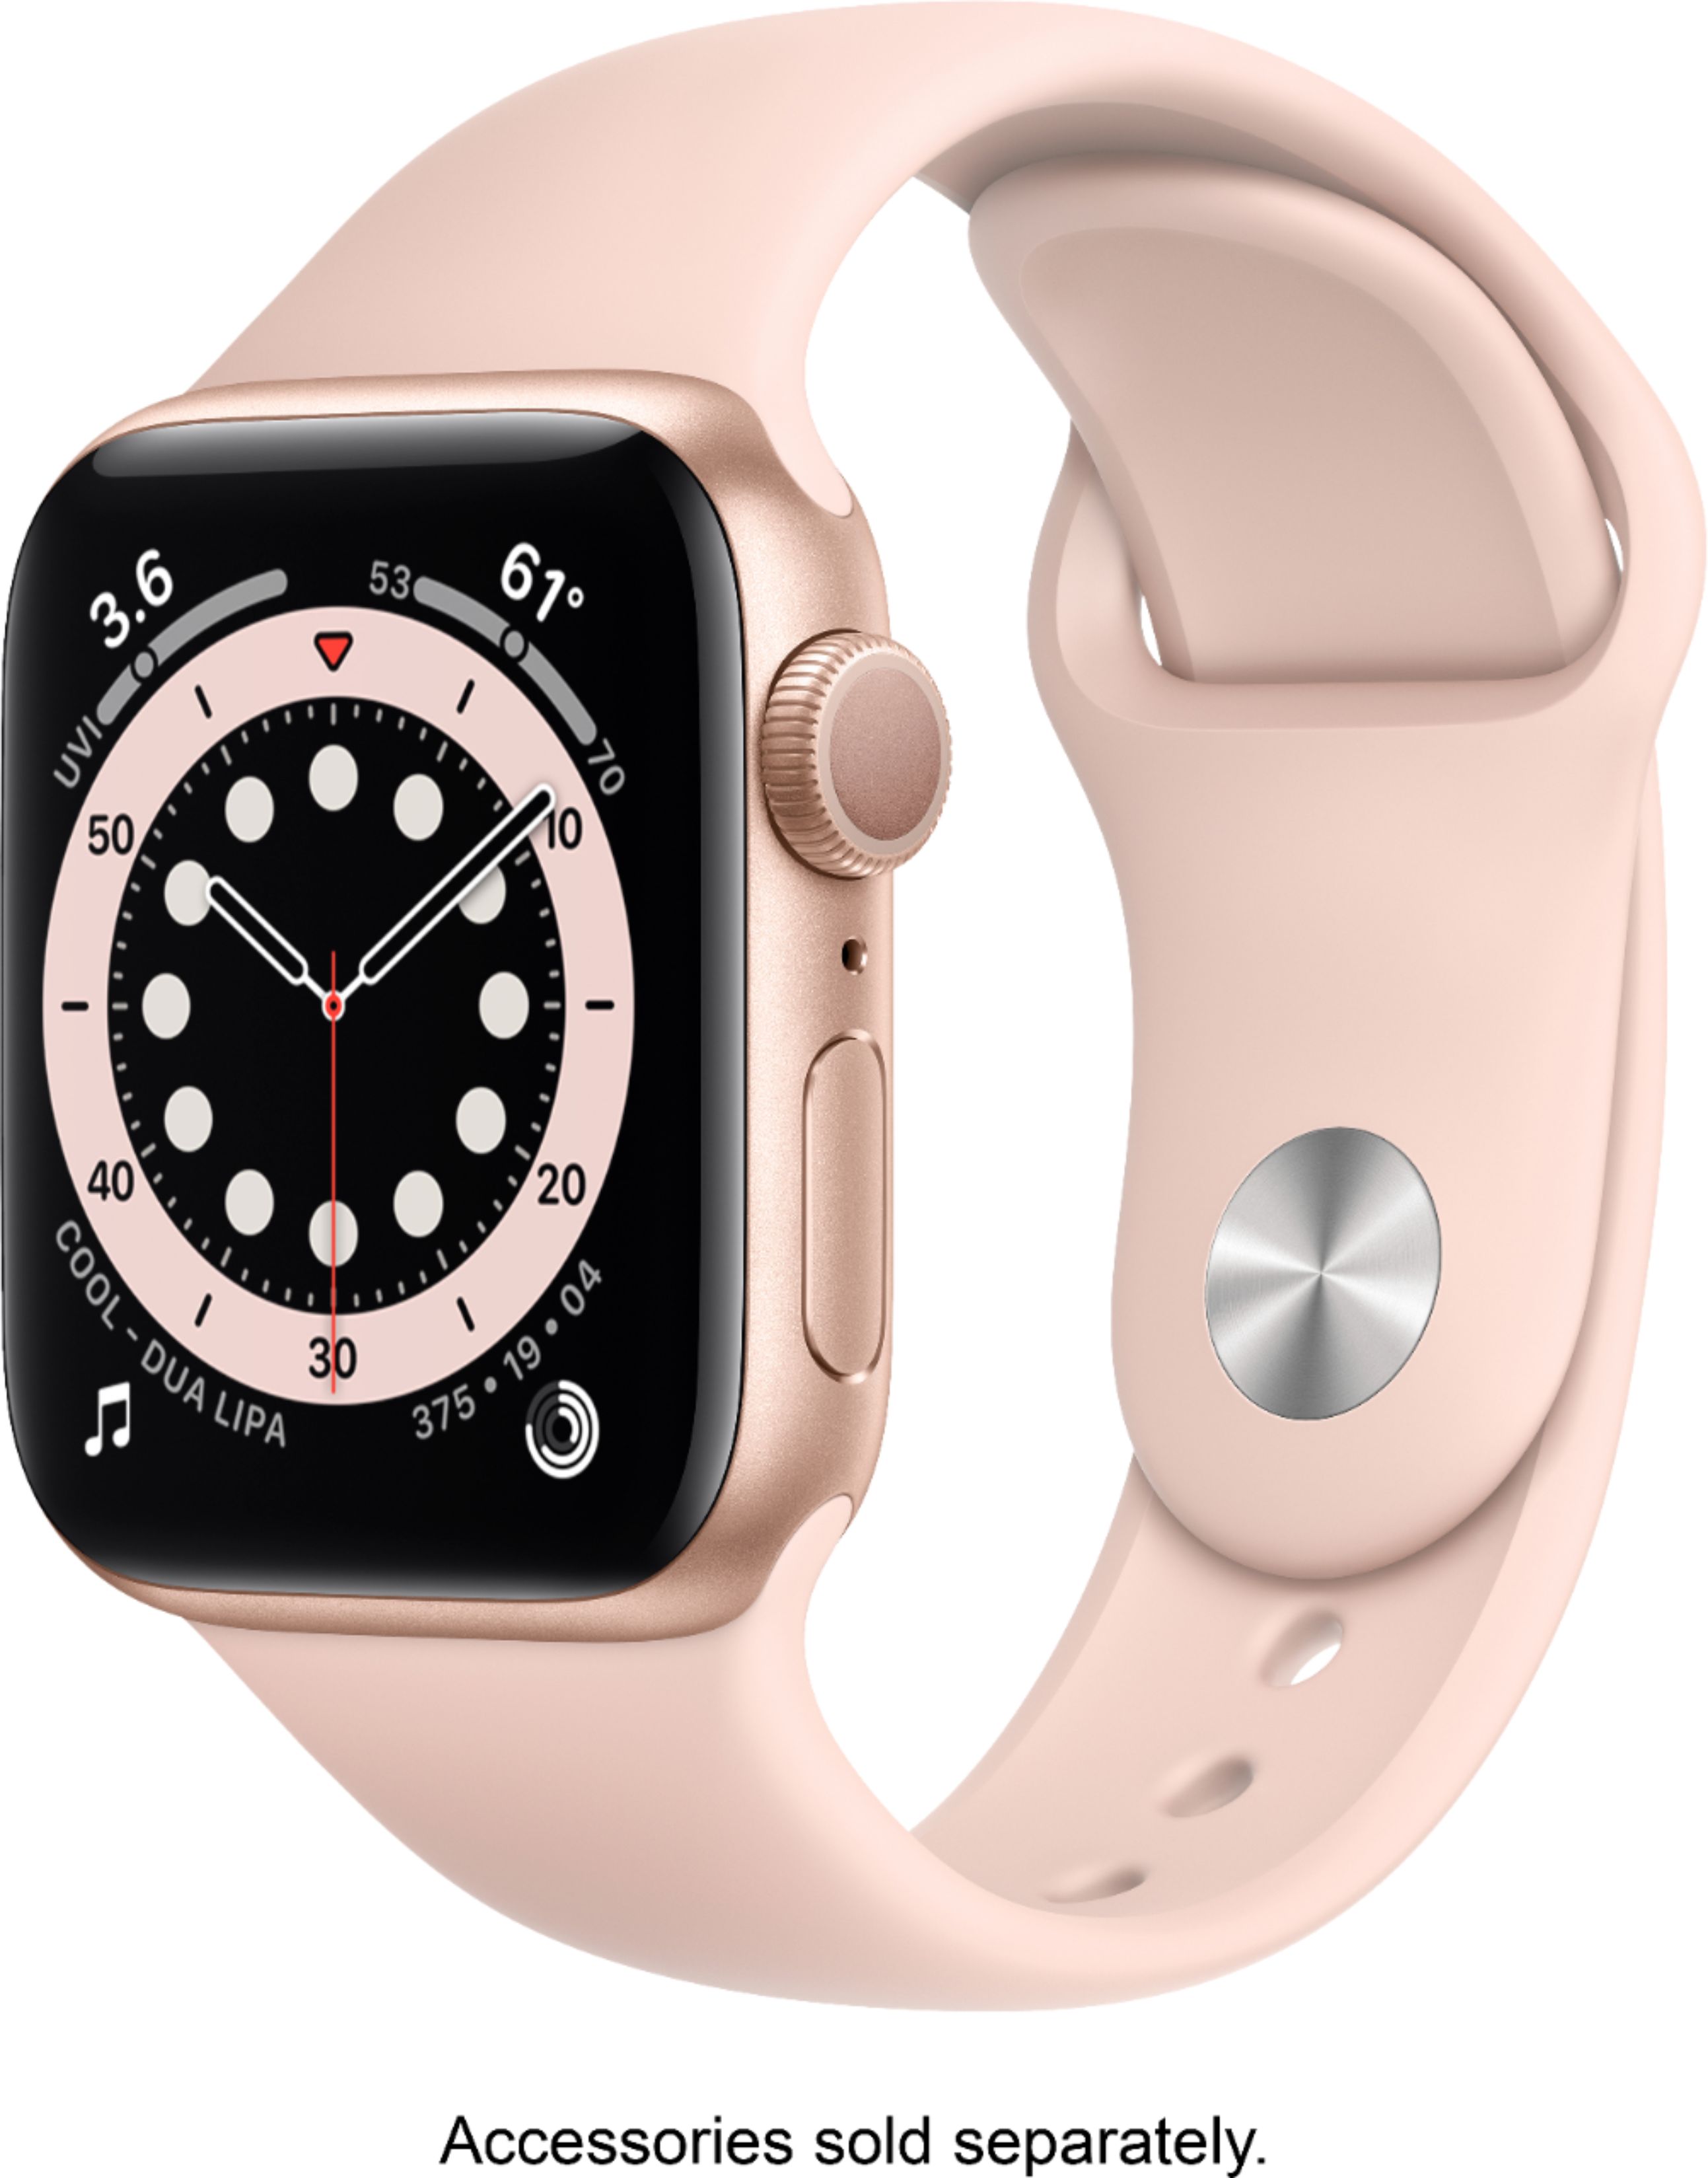 Cardenal defecto visión Apple Watch Series 6 (GPS) 40mm Gold Aluminum Case with Pink Sand Sport  Band Gold MG123LL/A - Best Buy